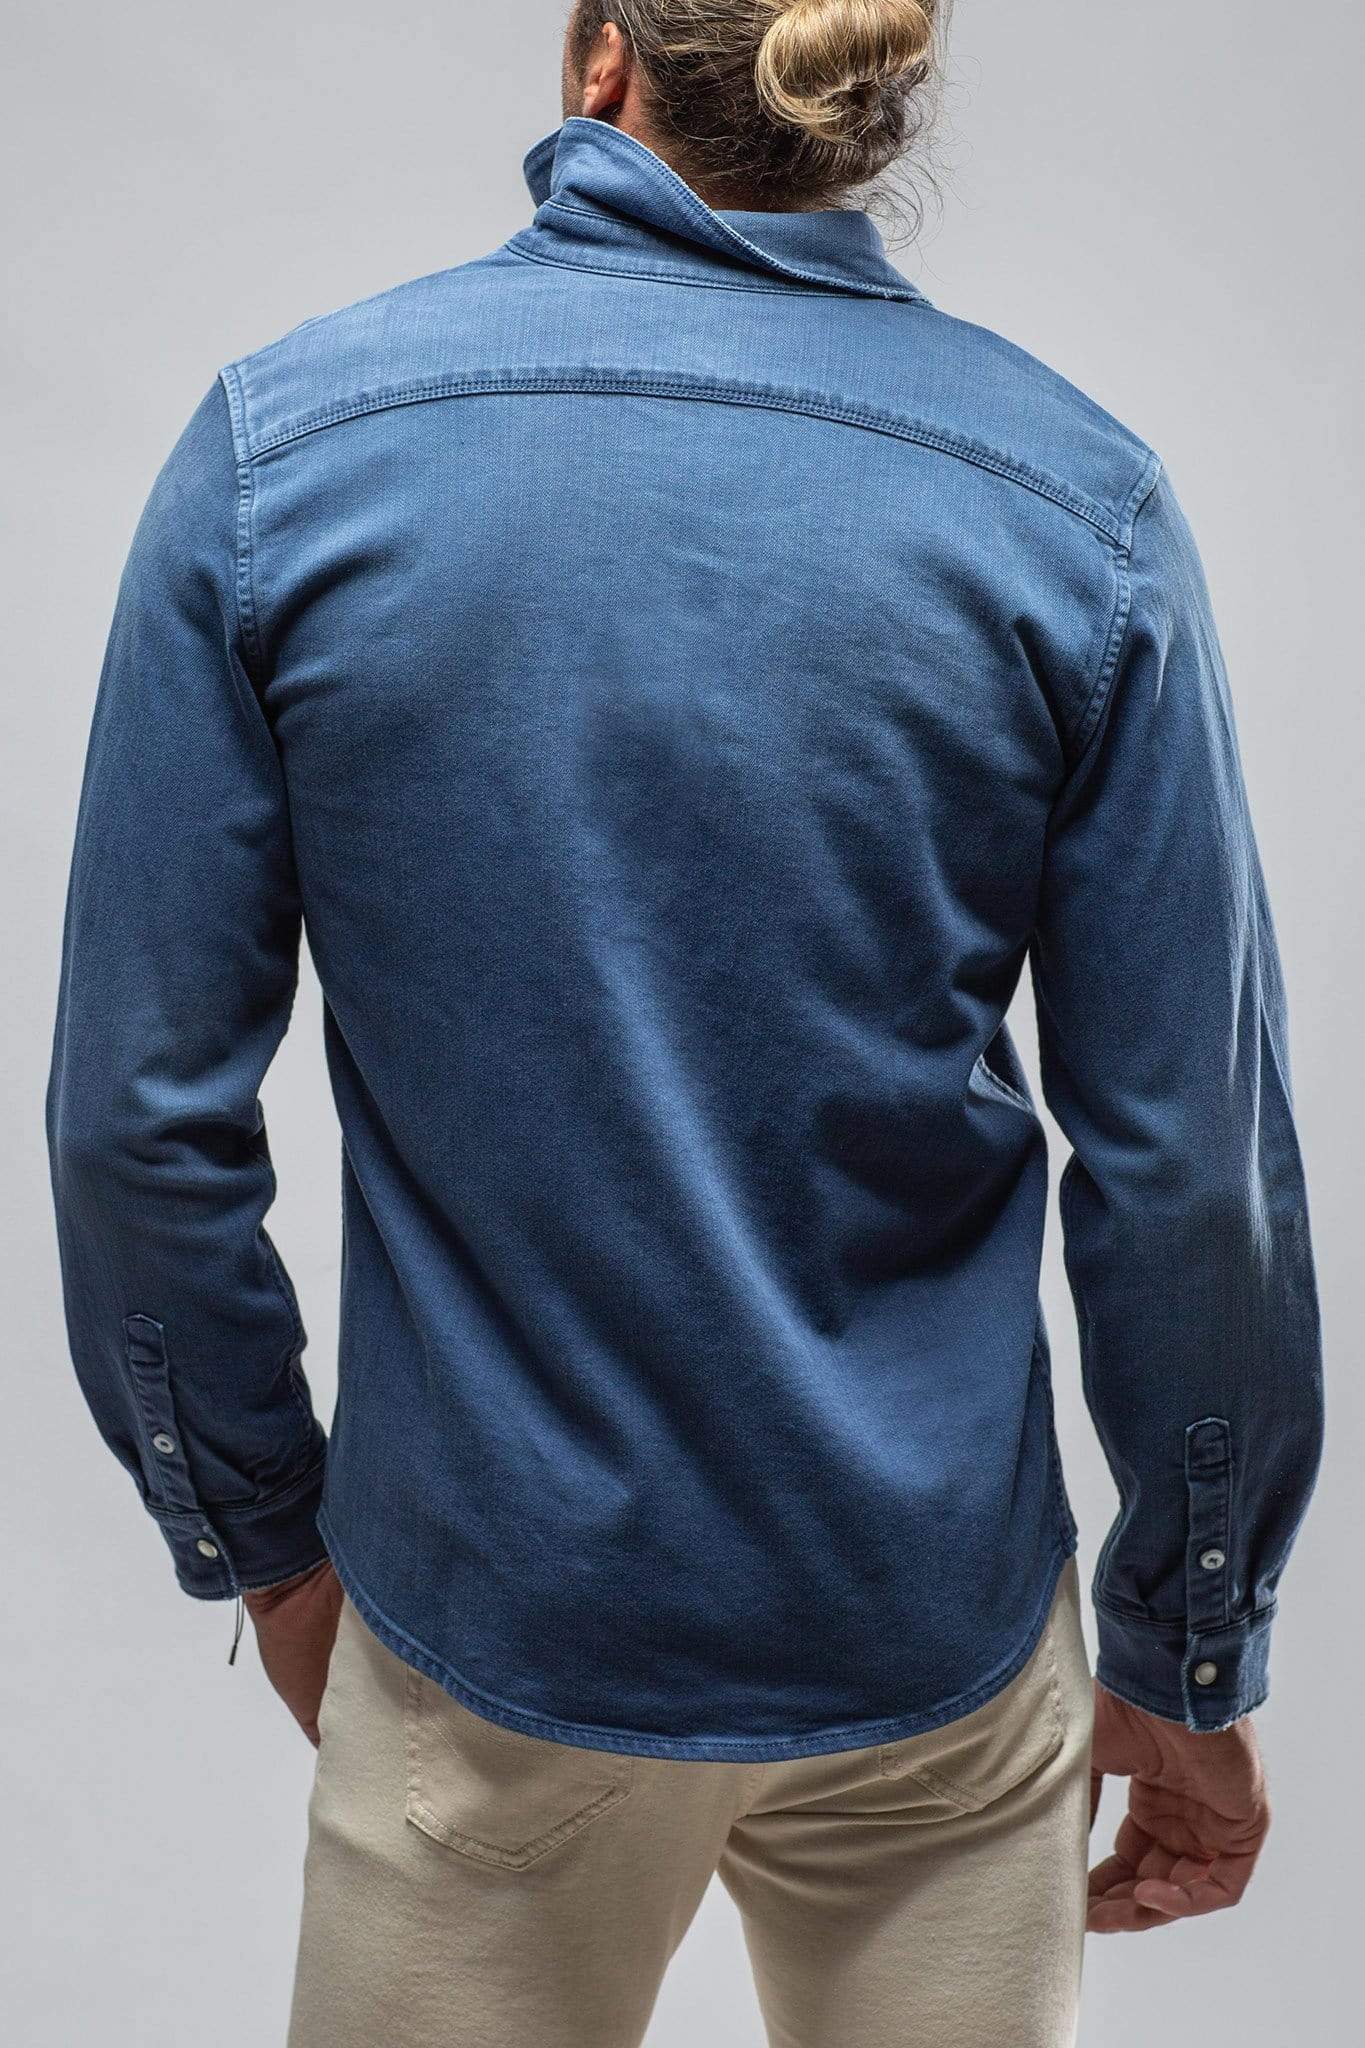 Ranger Colored Denim Snap Shirt In Indaco - AXEL'S